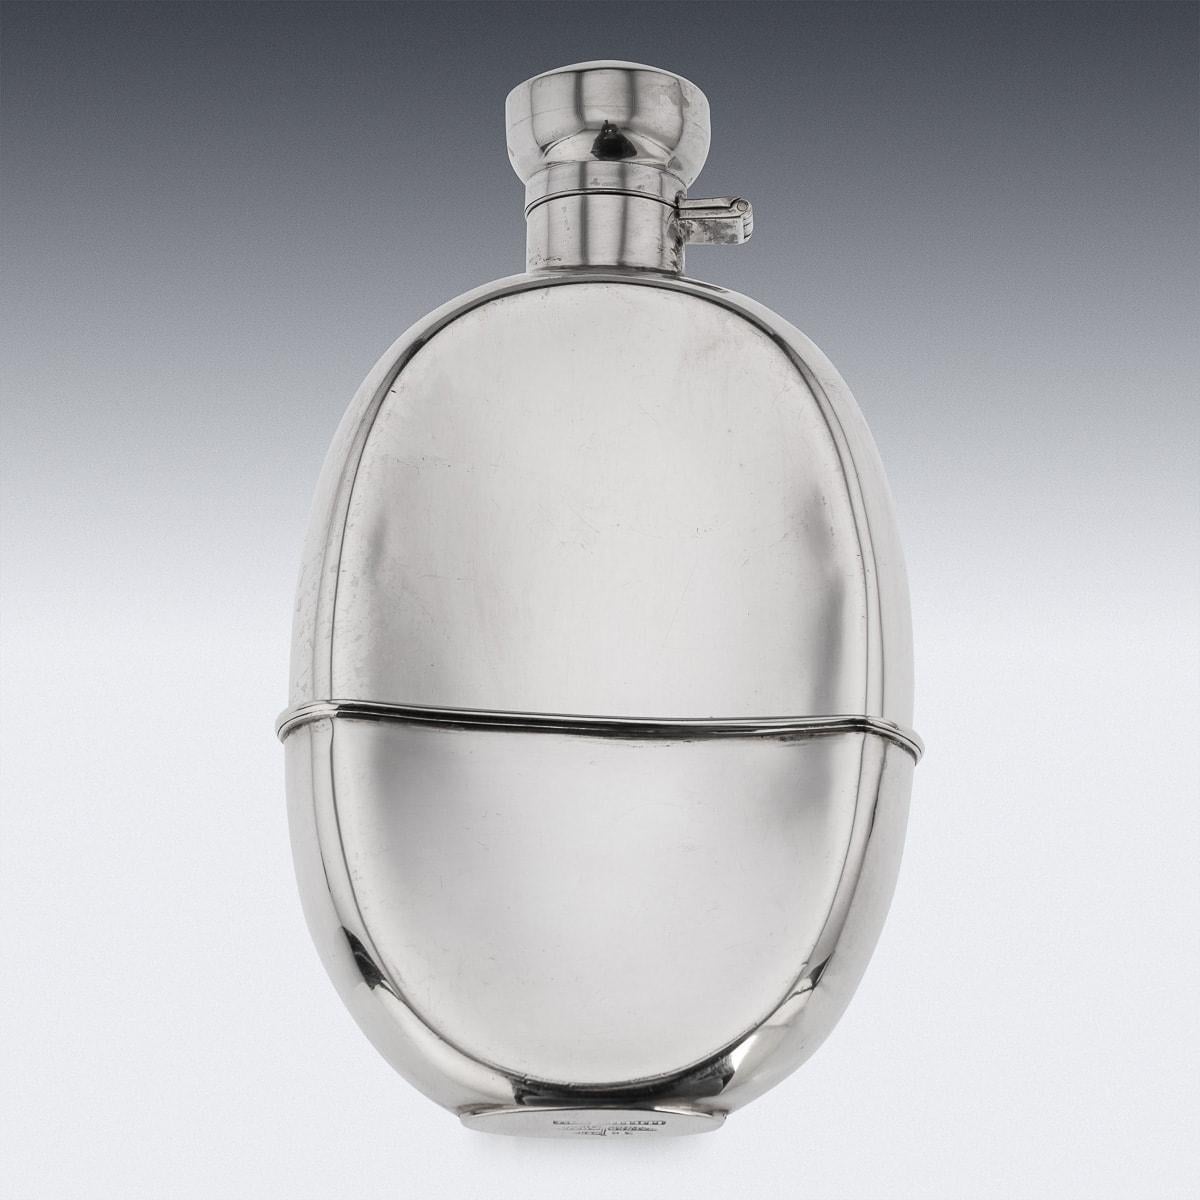 A superb 20th Century solid silver hip flask with silver hinged top. The flask features a smooth surface and a round oval shape along with a detachable cup. Hallmarked sterling silver (925 standard), Sheffield, year 1926 (i), Makers mark Walker &